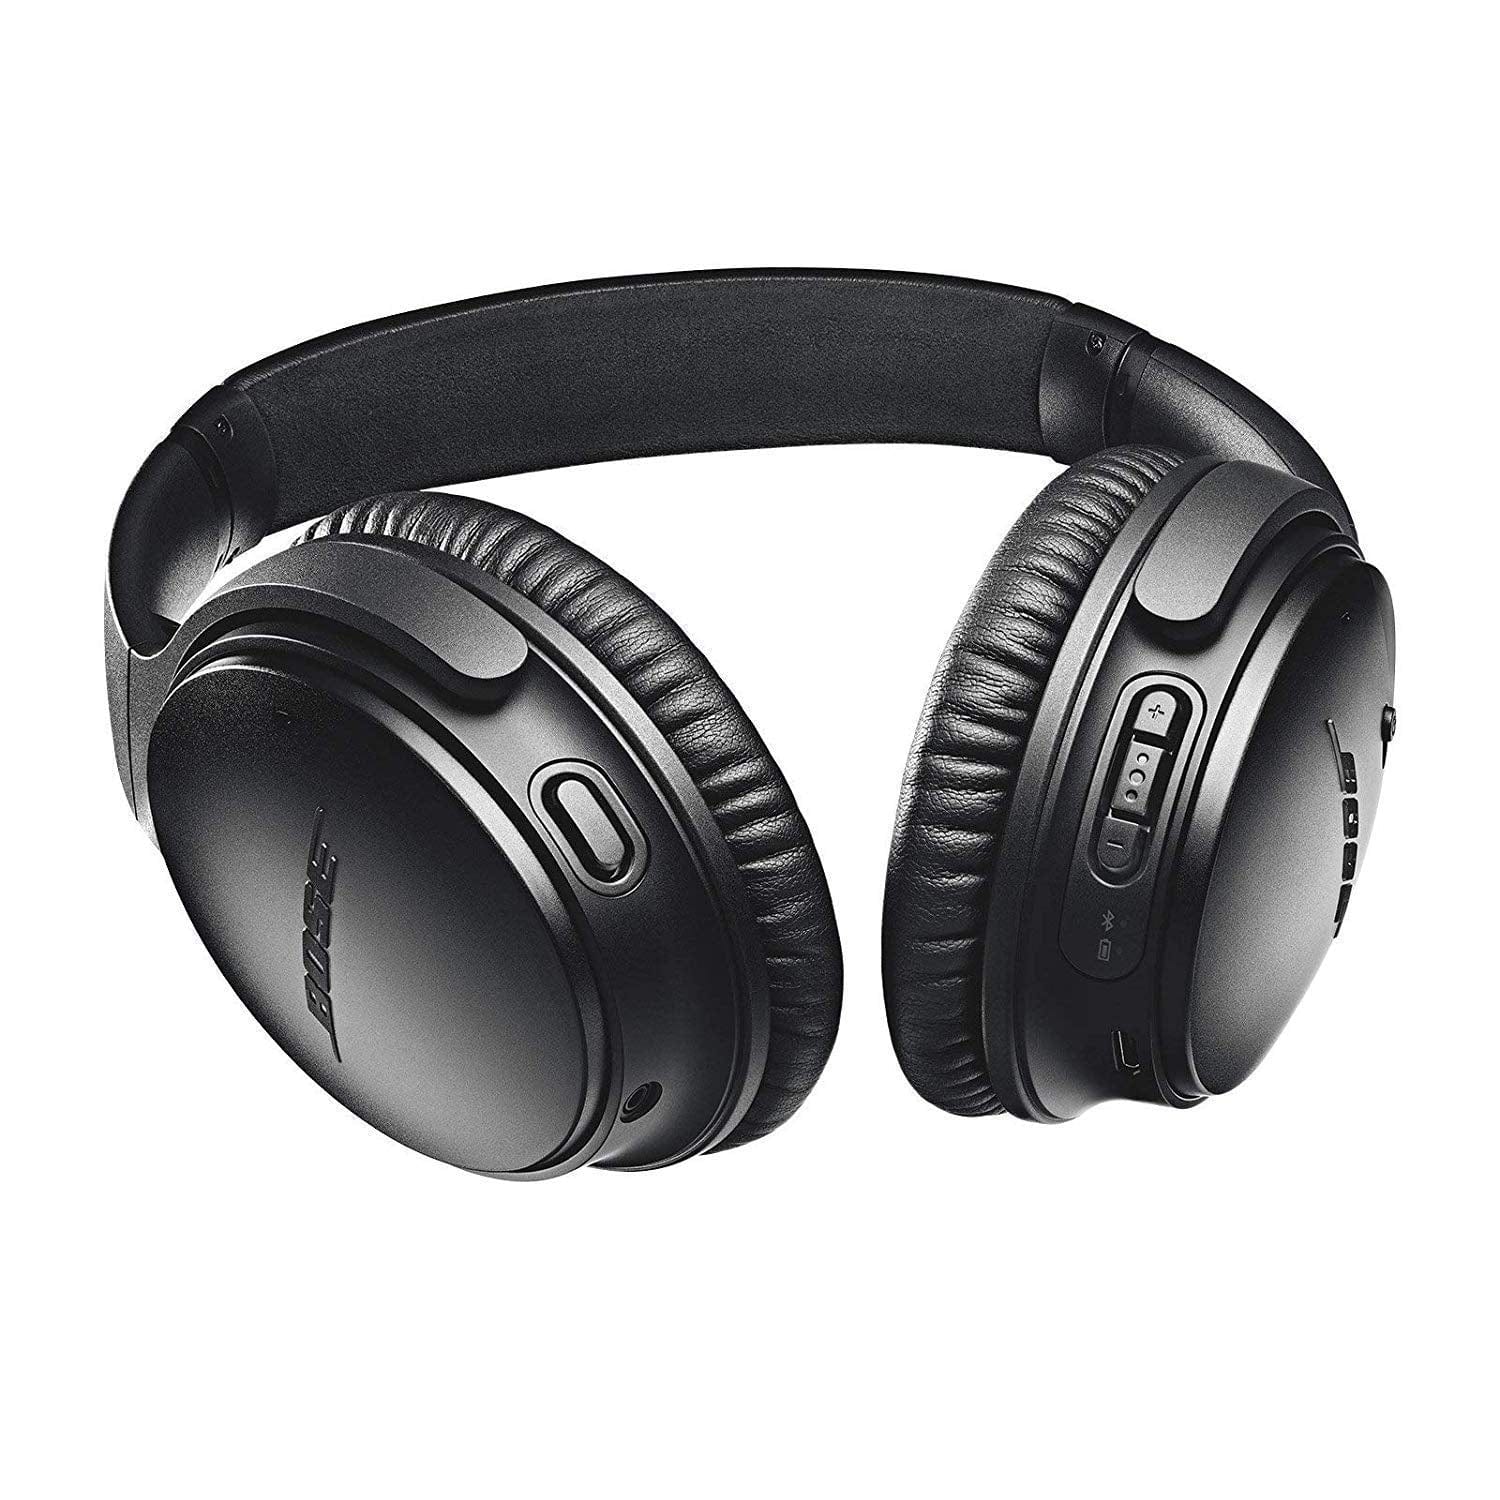 Bose Quietcomfort 35 Ii Noise Cancelling Bluetooth Wireless Over Ear Headphones With Mic And Alexa Voice Control, Black - Smart Tech Shopping